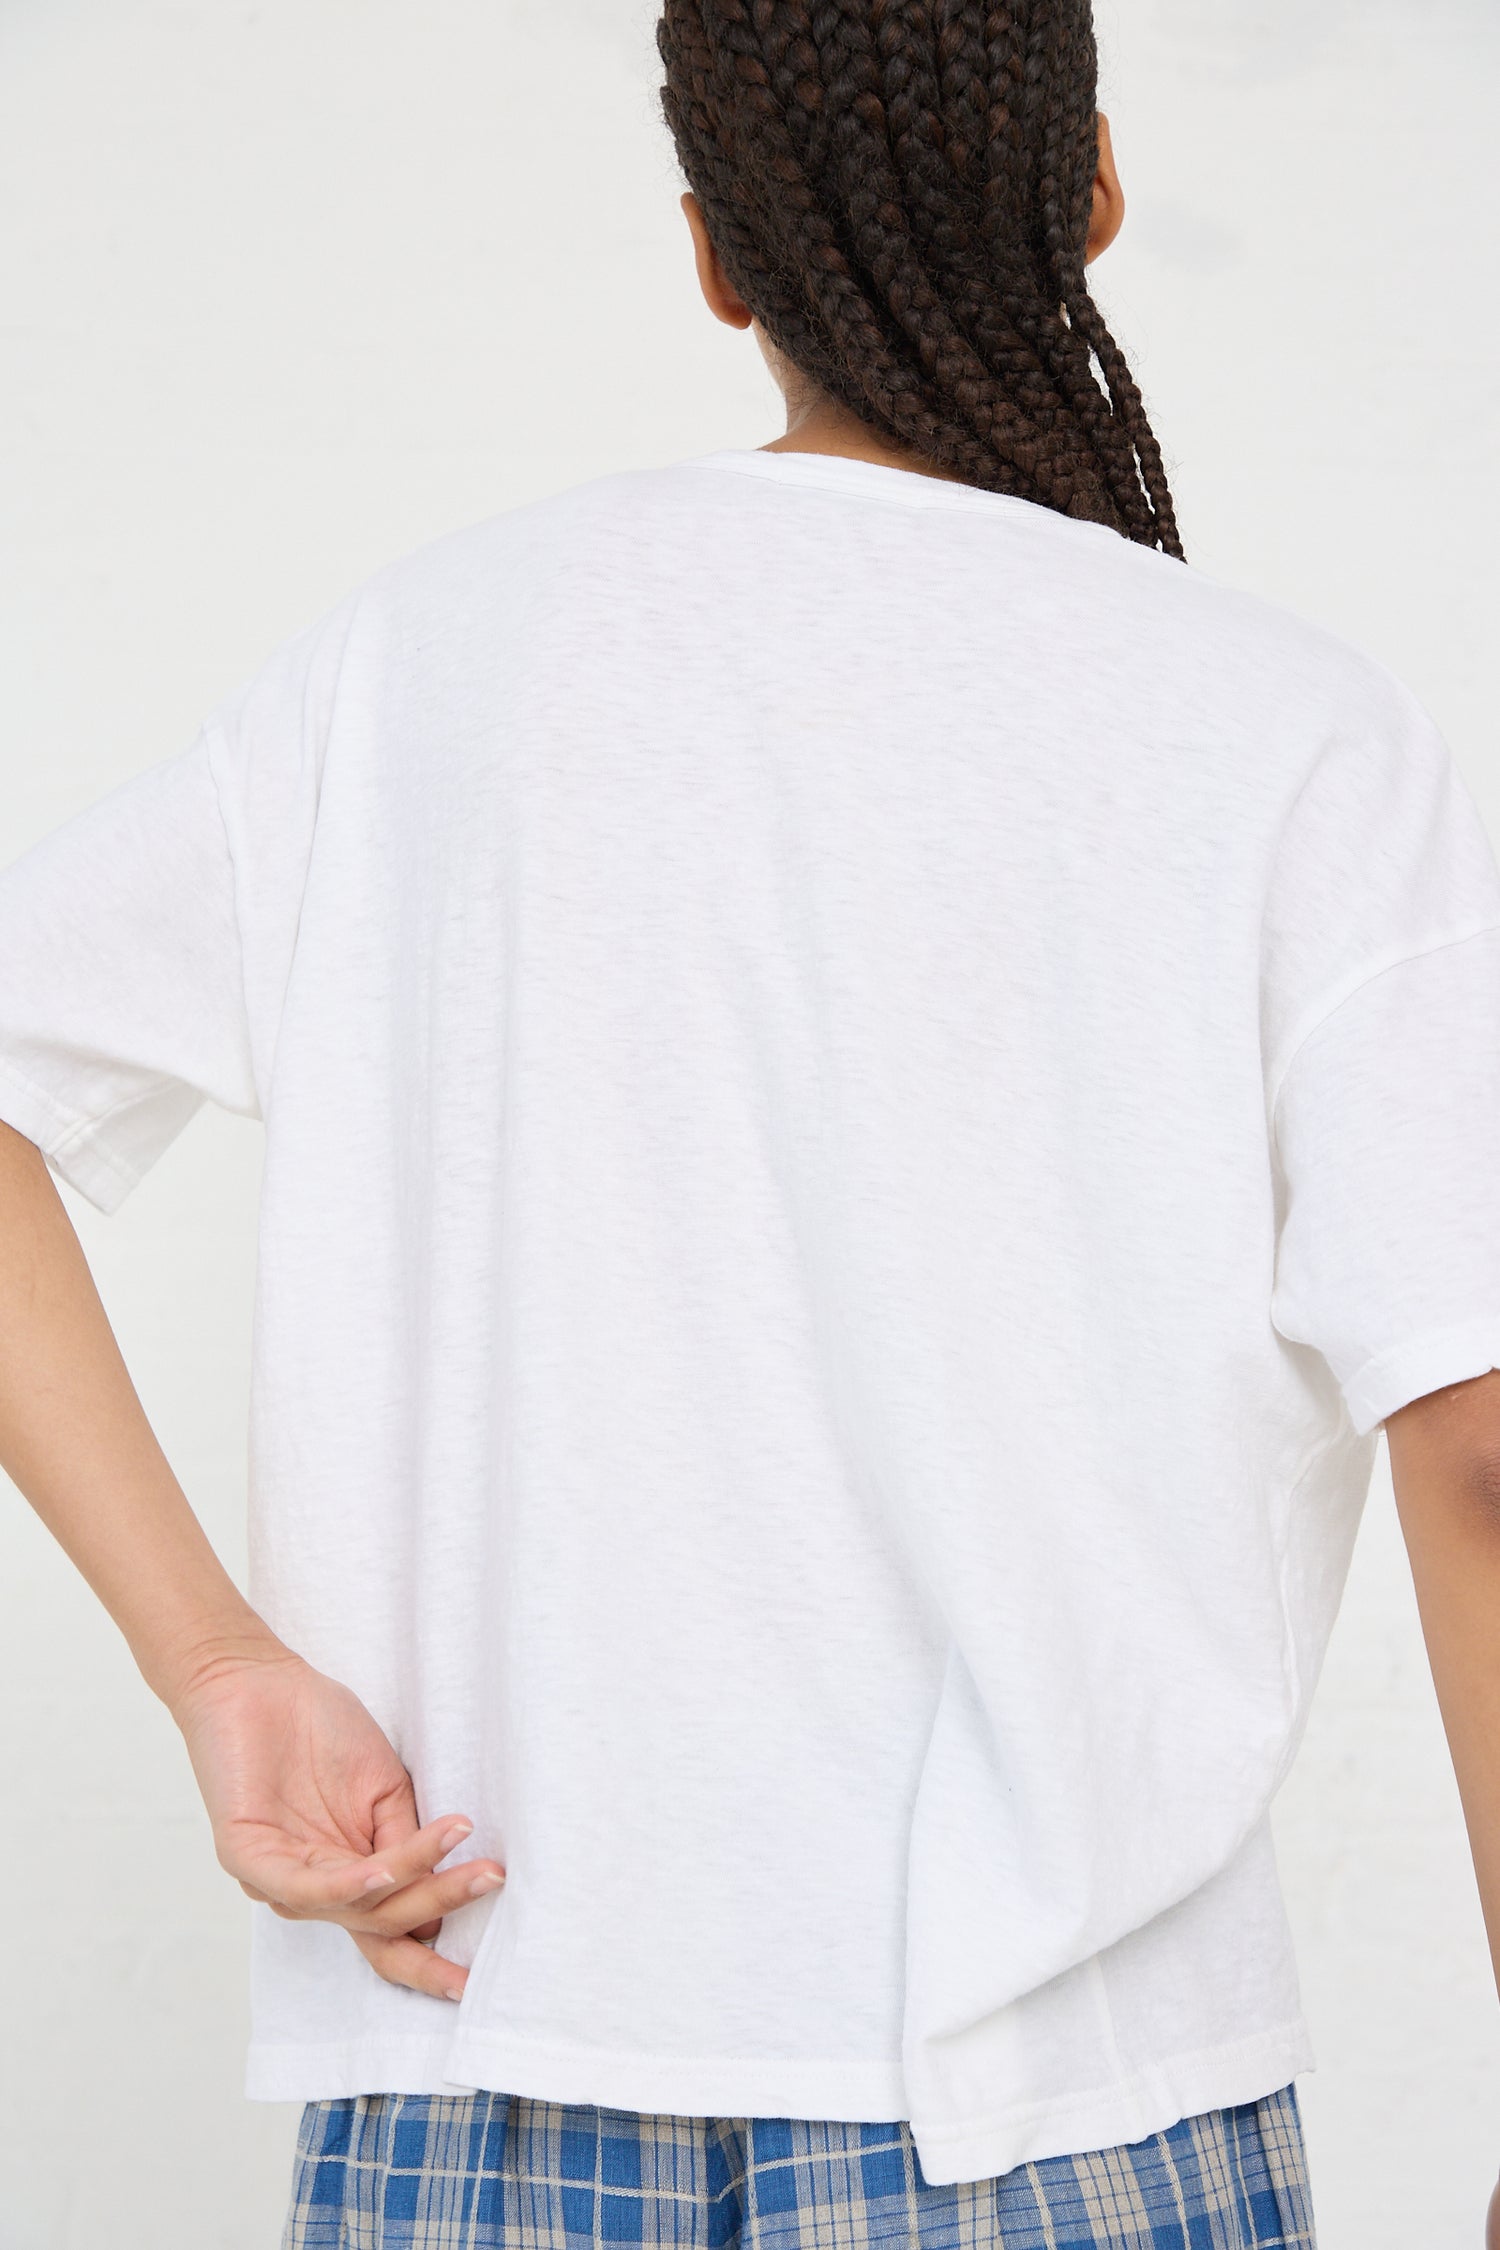 Person from behind wearing an oversized Ichi Antiquités Cotton T-Shirt in White and plaid pants.